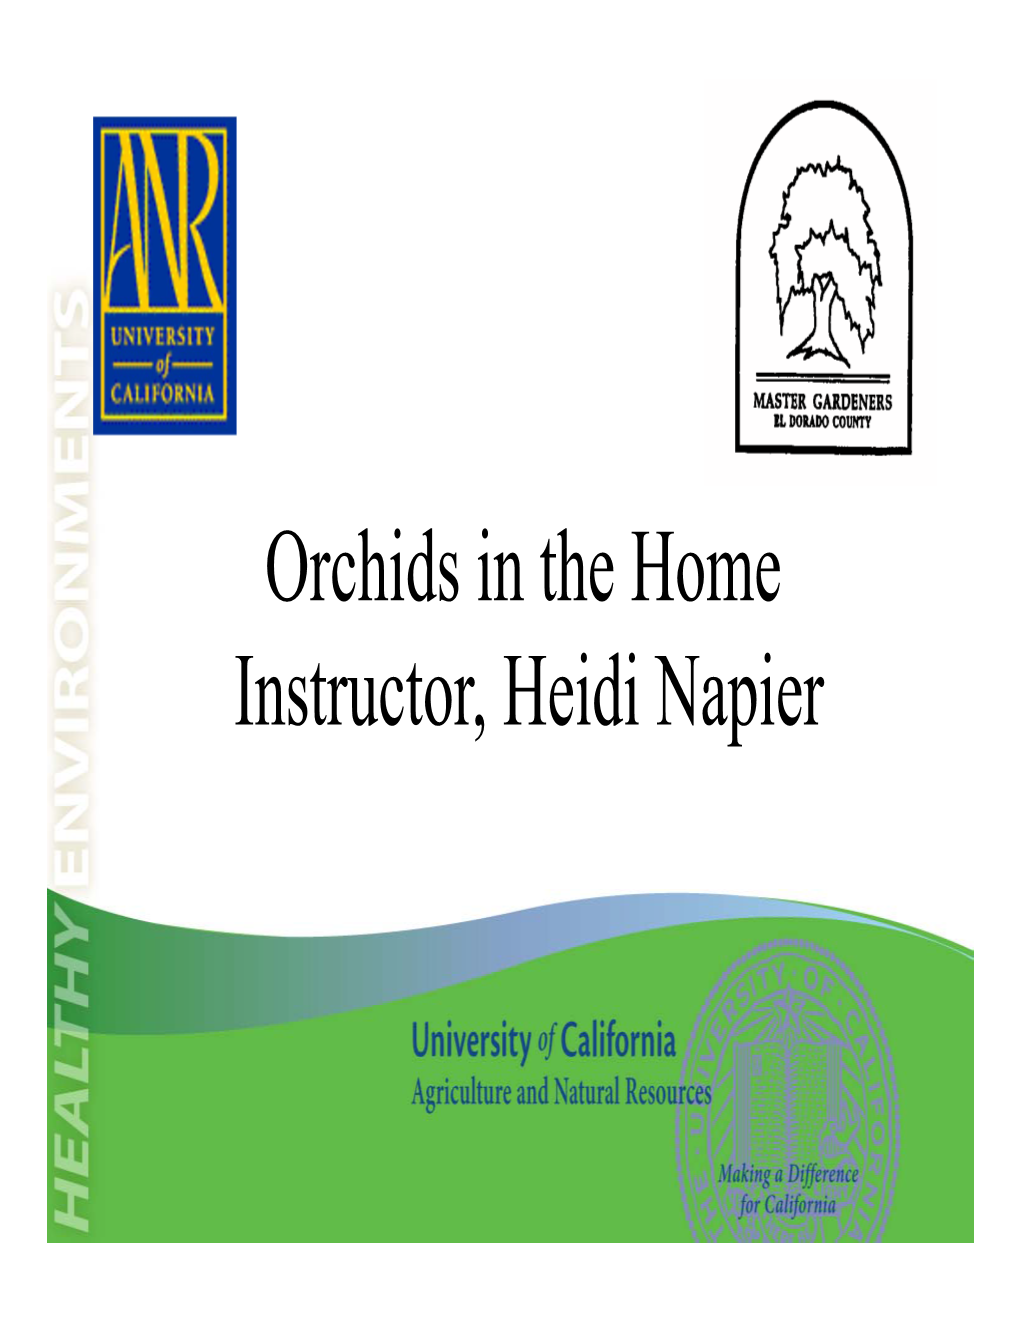 Orchids in the Home Instructor, Heidi Napier History